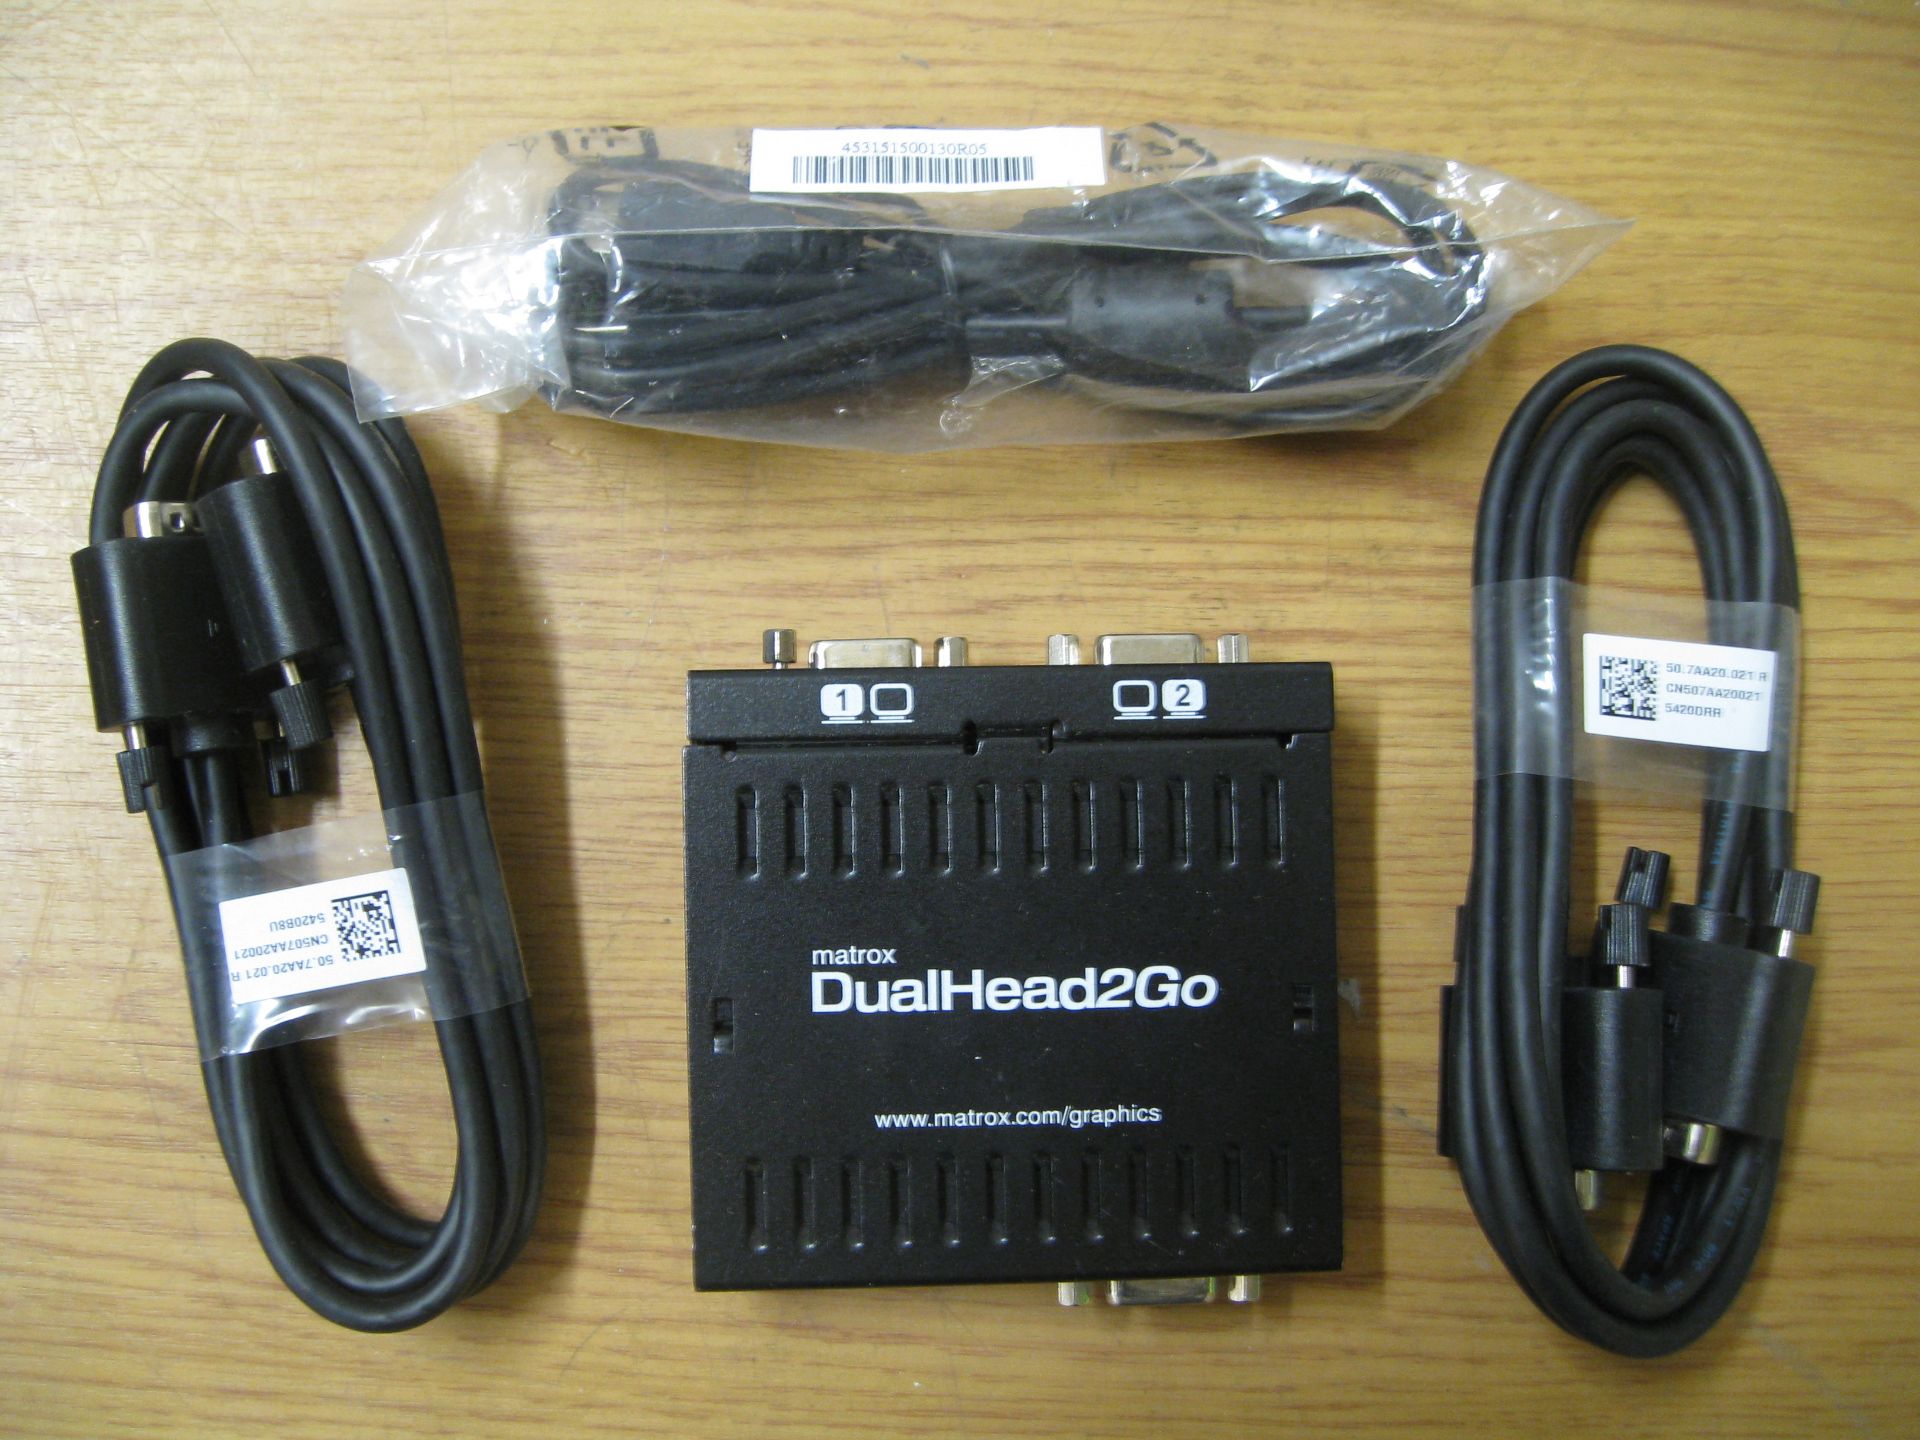 Matrox Dual Head 2 Go D2G-A2A-IF Dual VGA USB Display Adapter. Complete with 2 x VGA cables & USB